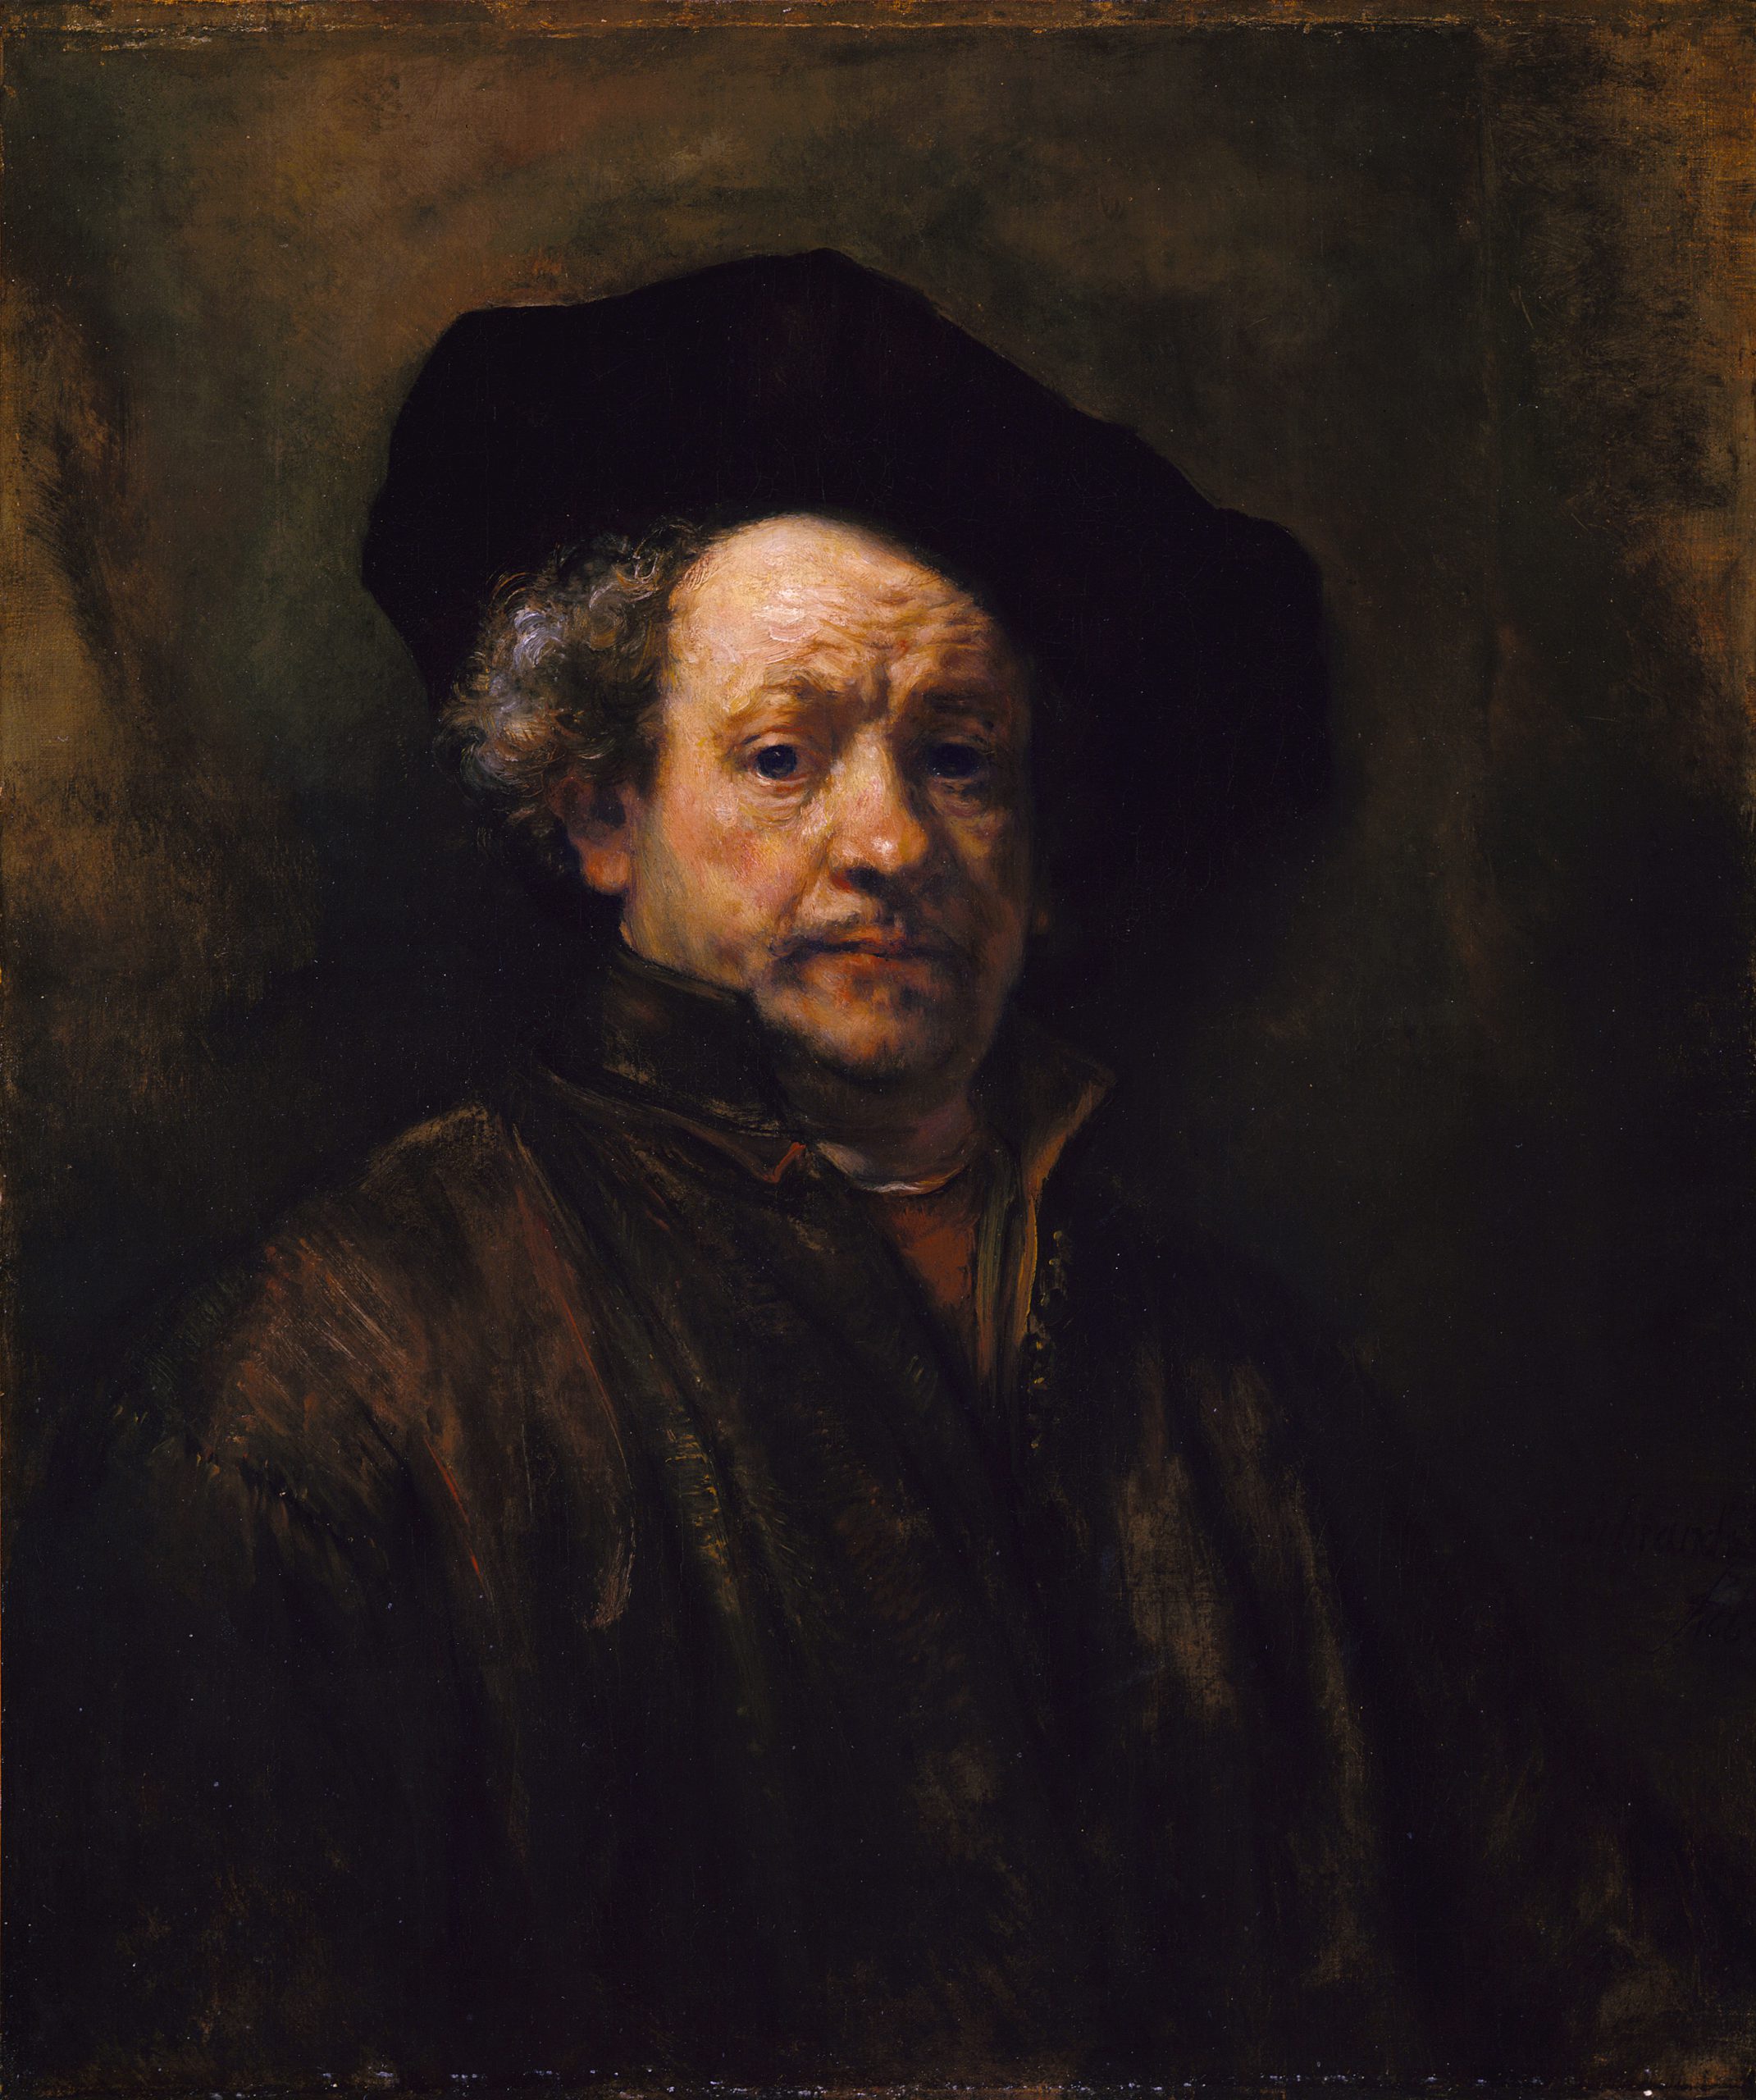 Painted portrait of a white man with curly gray hair wearing a large black beret and a dark brown cloak. The man's forehead and the left side of his face are highlighted by a light coming from above. He stares directly at the viewer with pursed lips and a wrinkled brow.